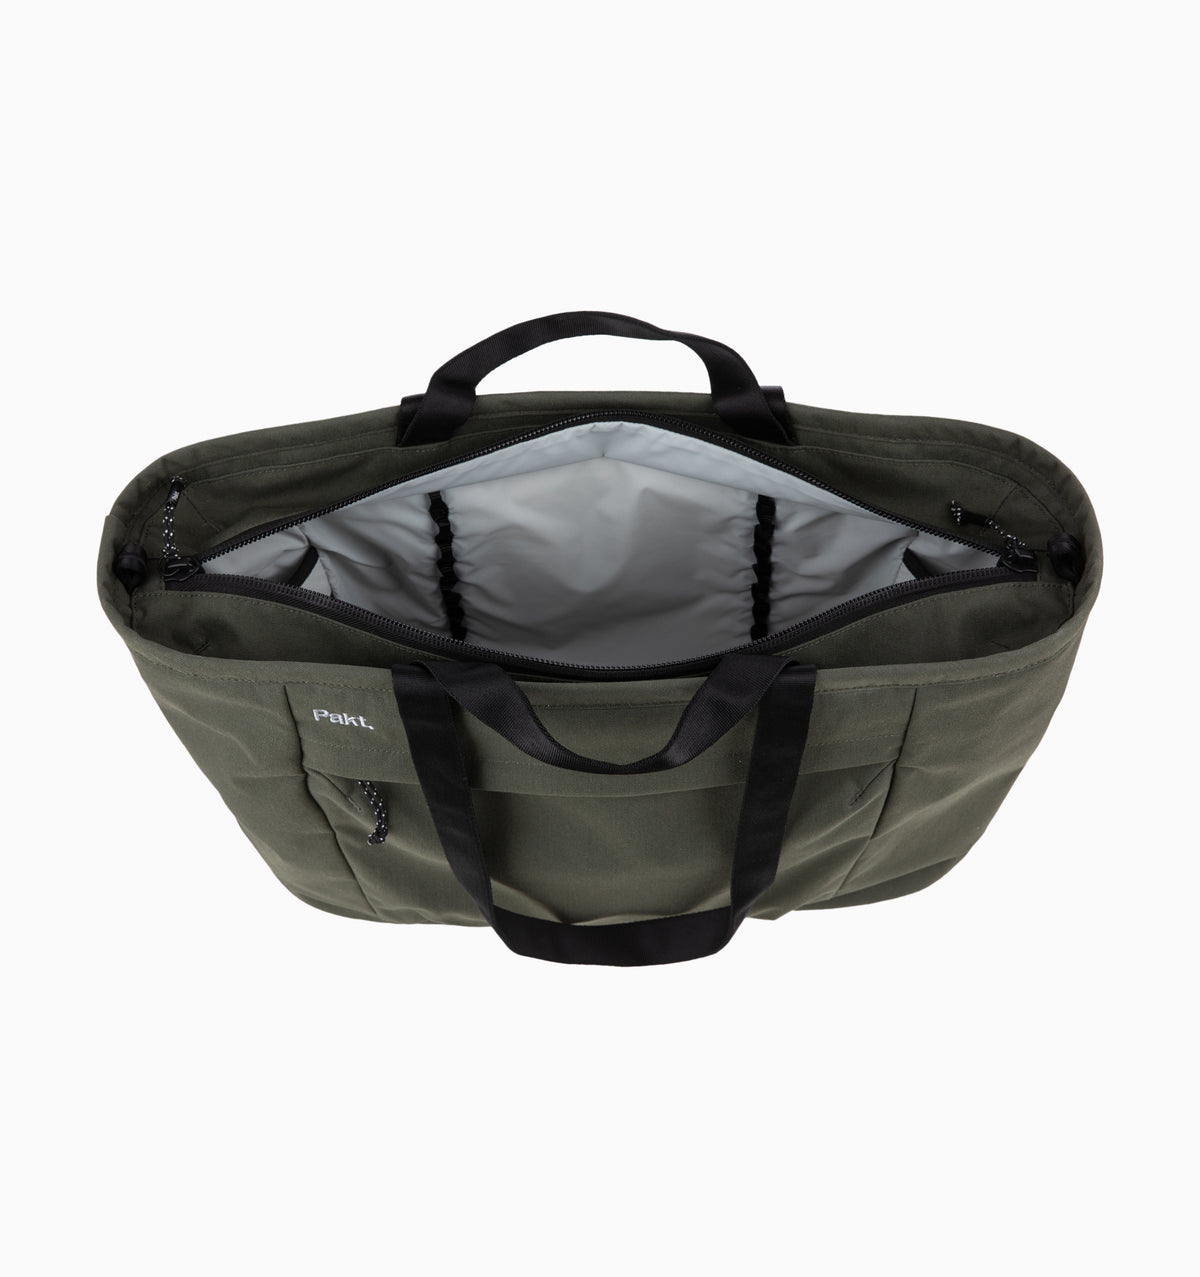 Pakt 16" Everyday Laptop Tote 25L - Forest